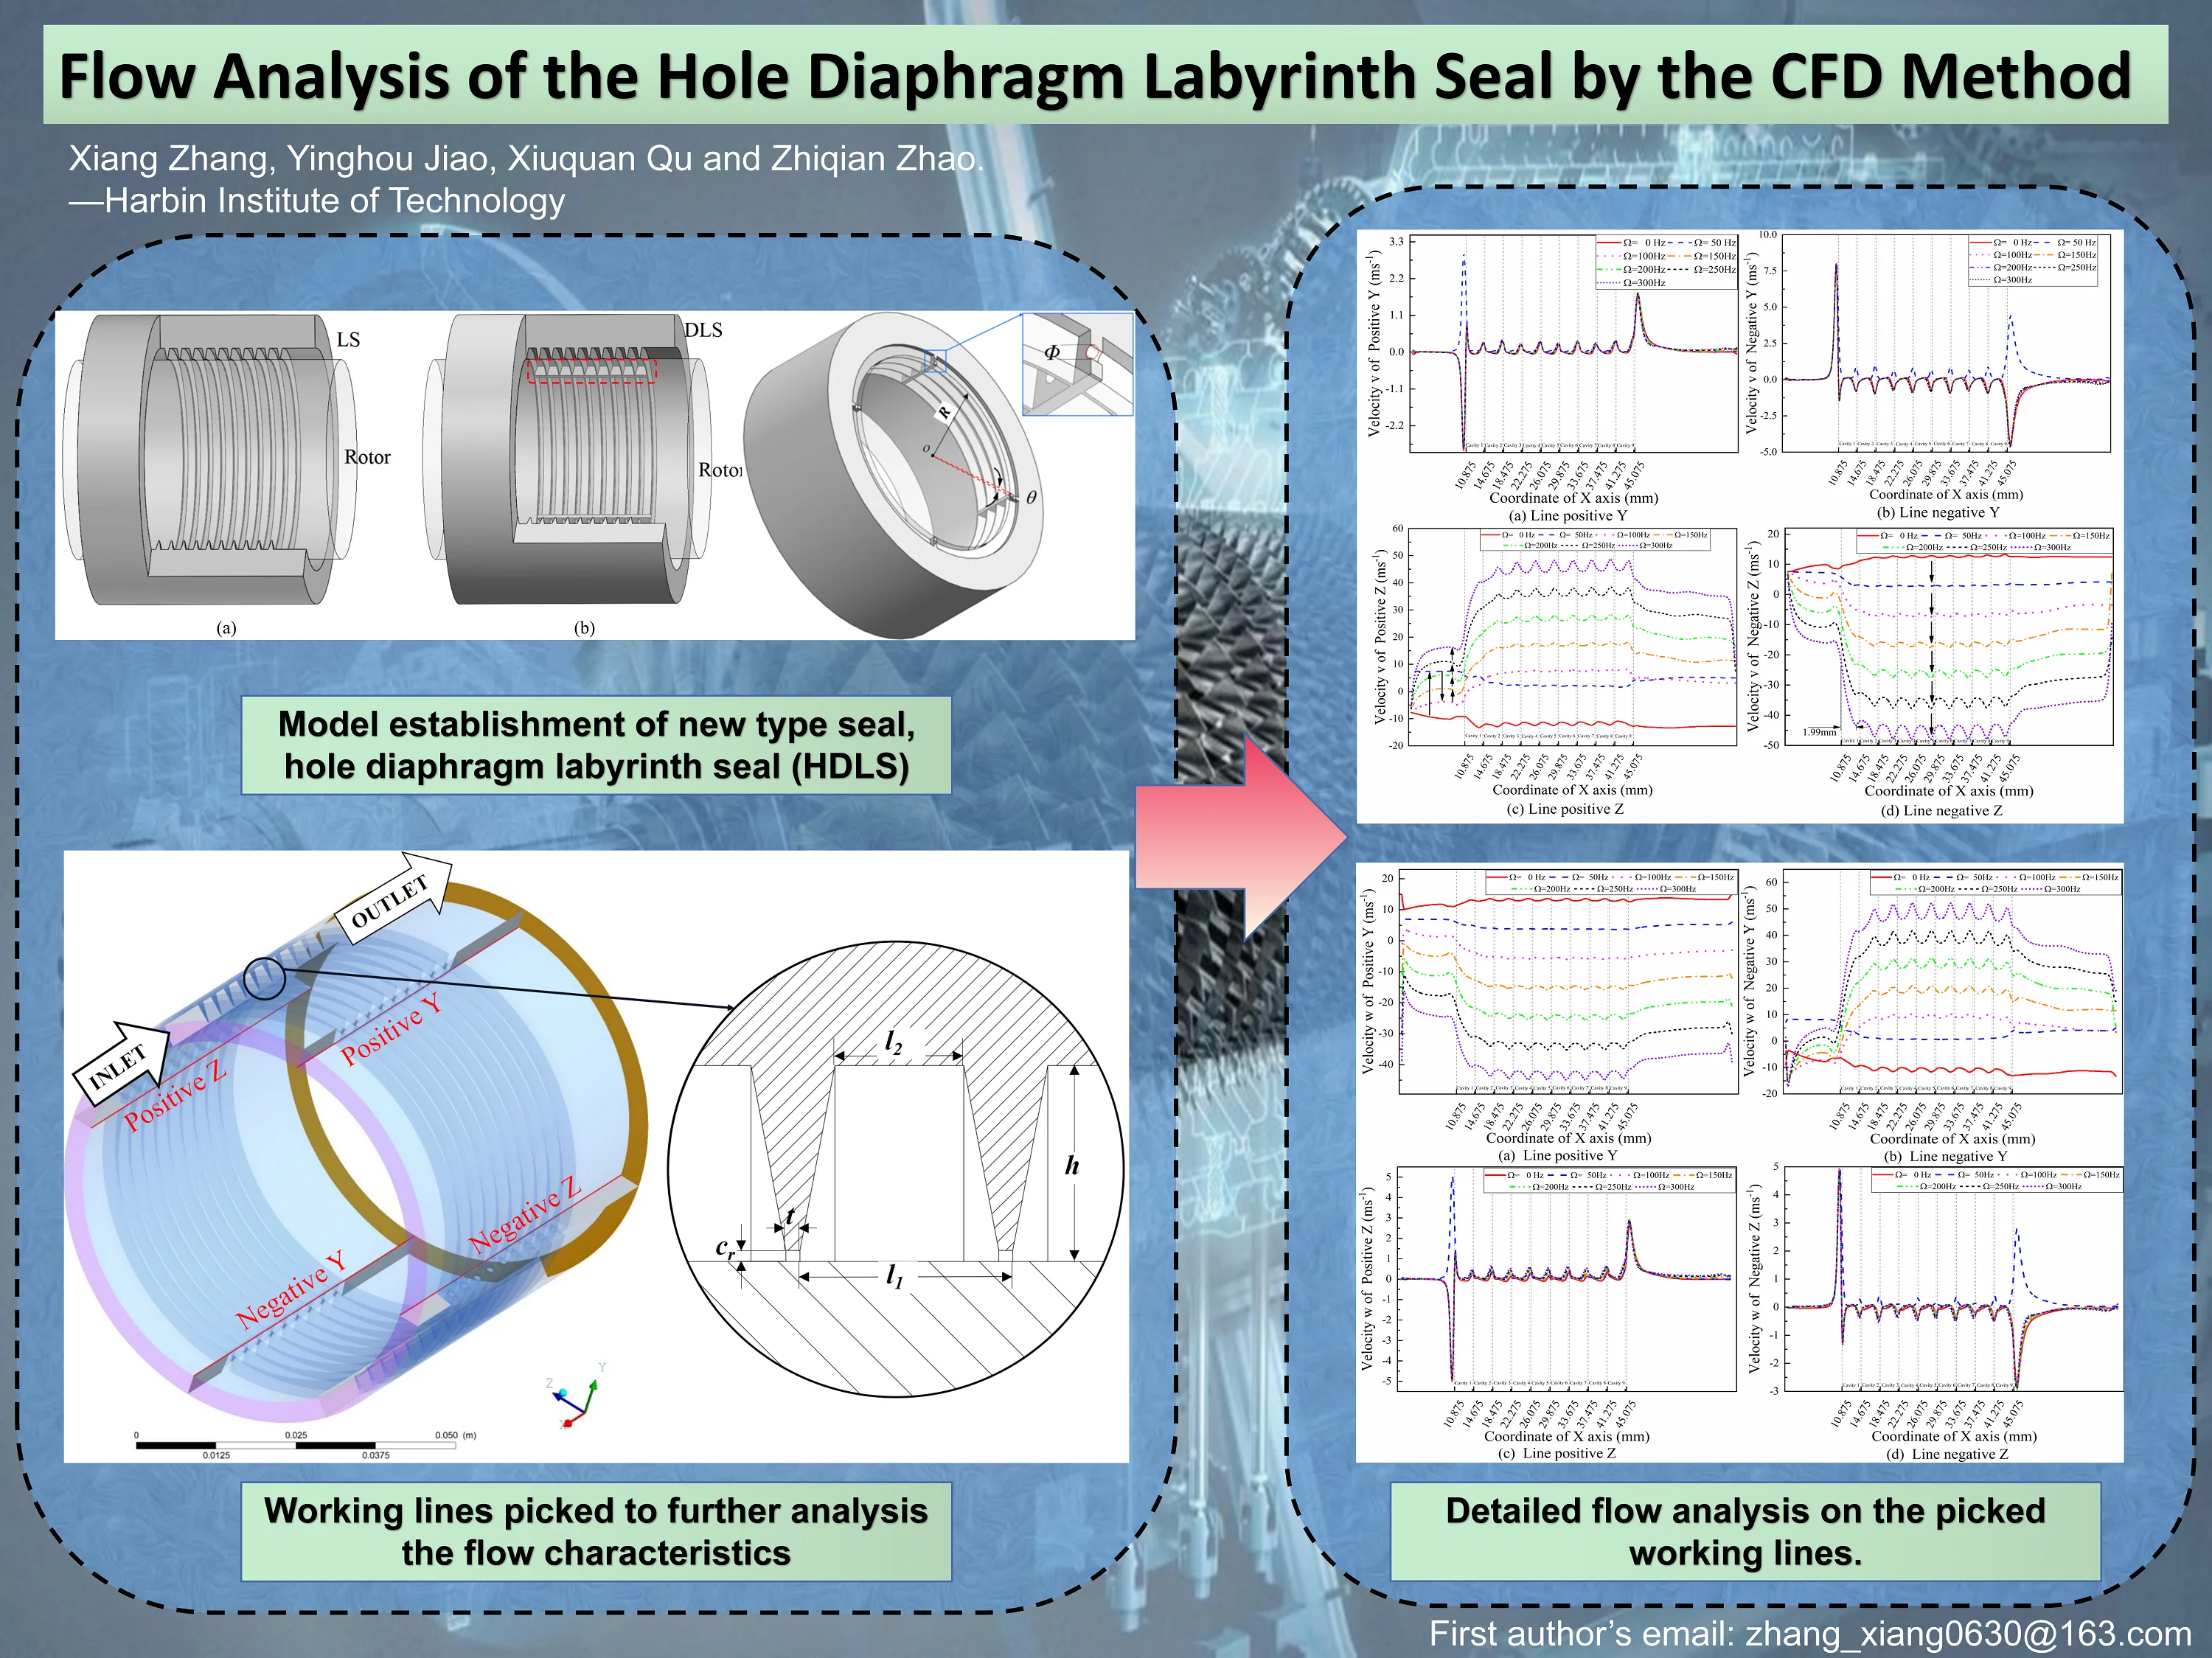 Flow analysis of the hole diaphragm labyrinth seal by the CFD method